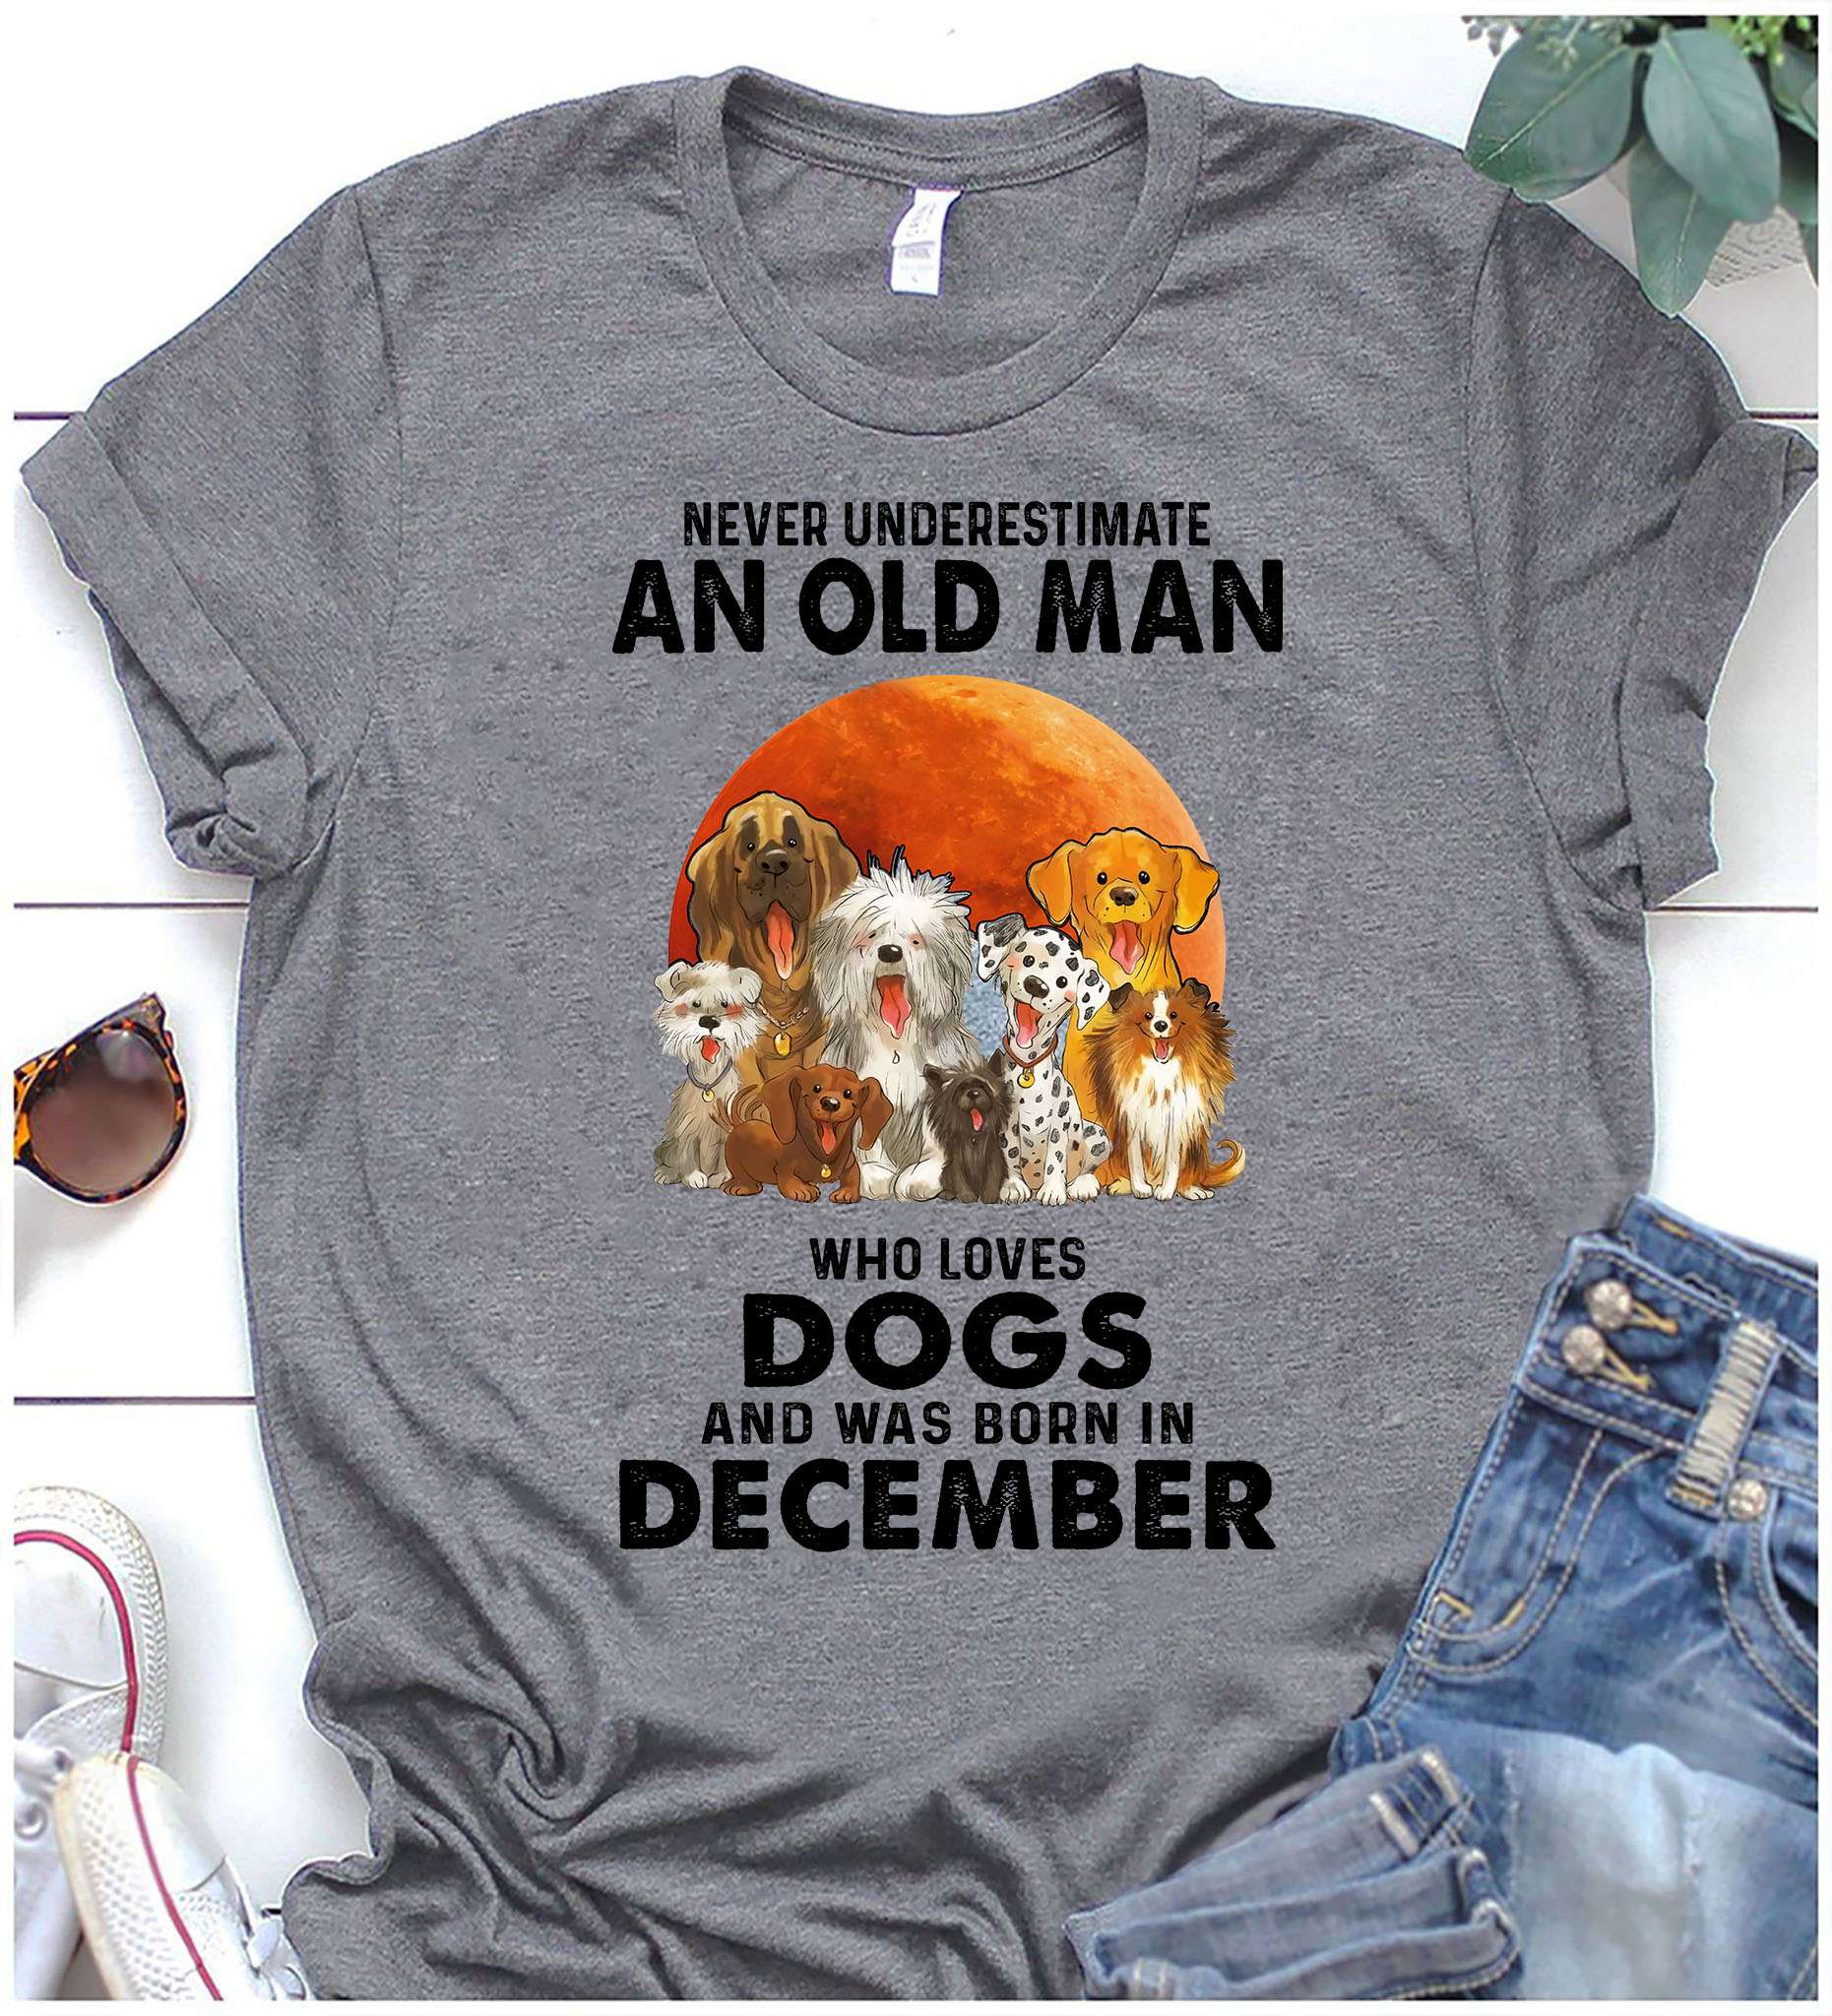 Never underestimate an old man who loves dogs and was born in December